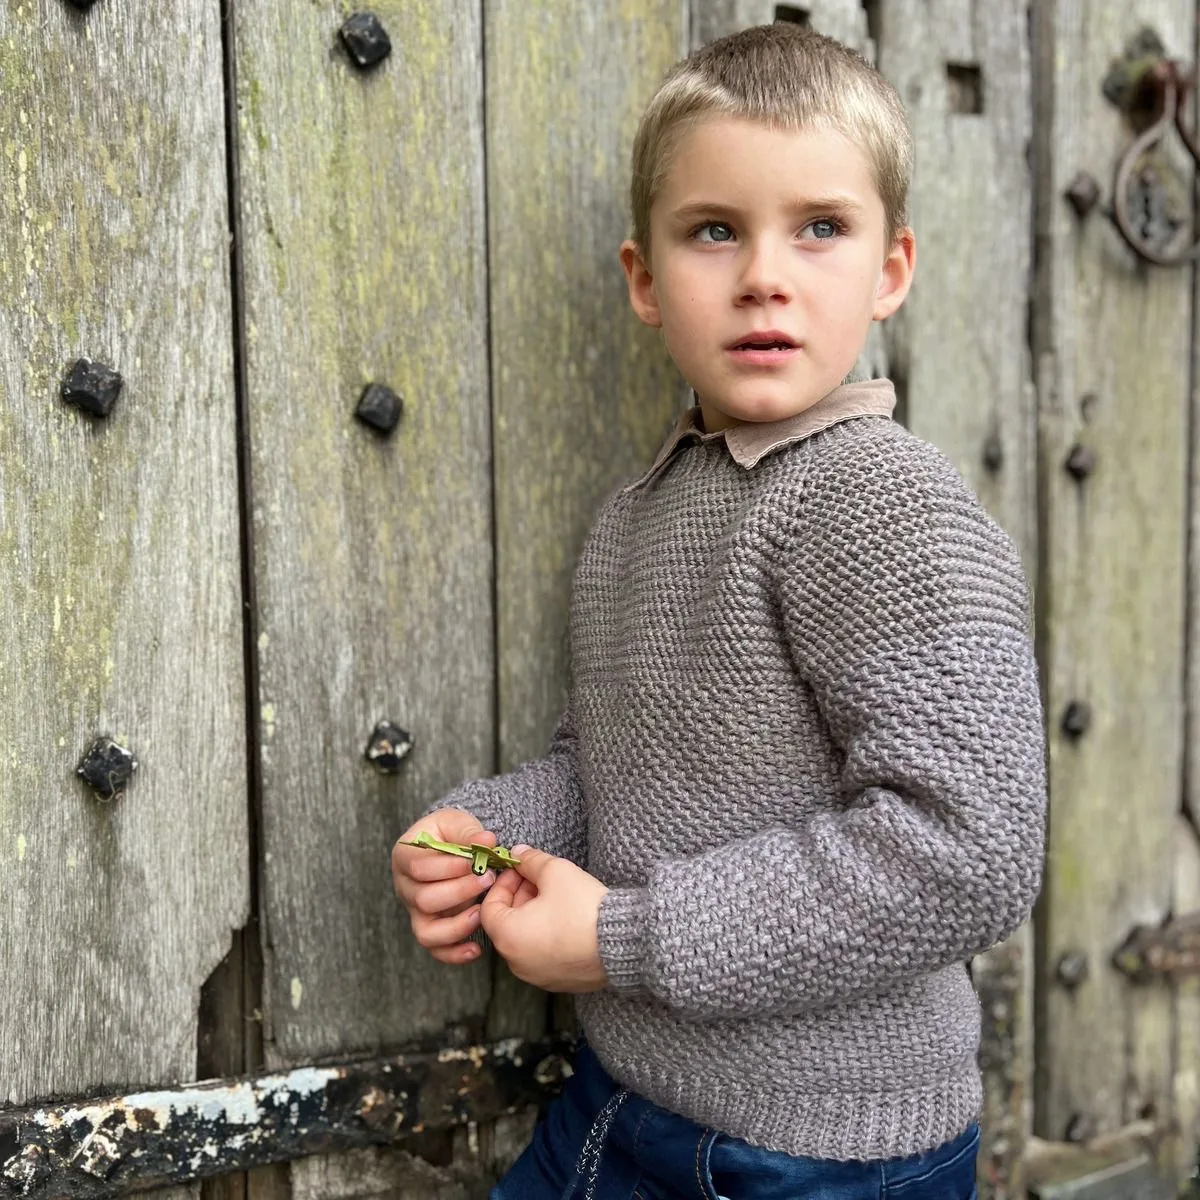 Crochet sweater pattern for boys on a 5 year old leaning against a door.